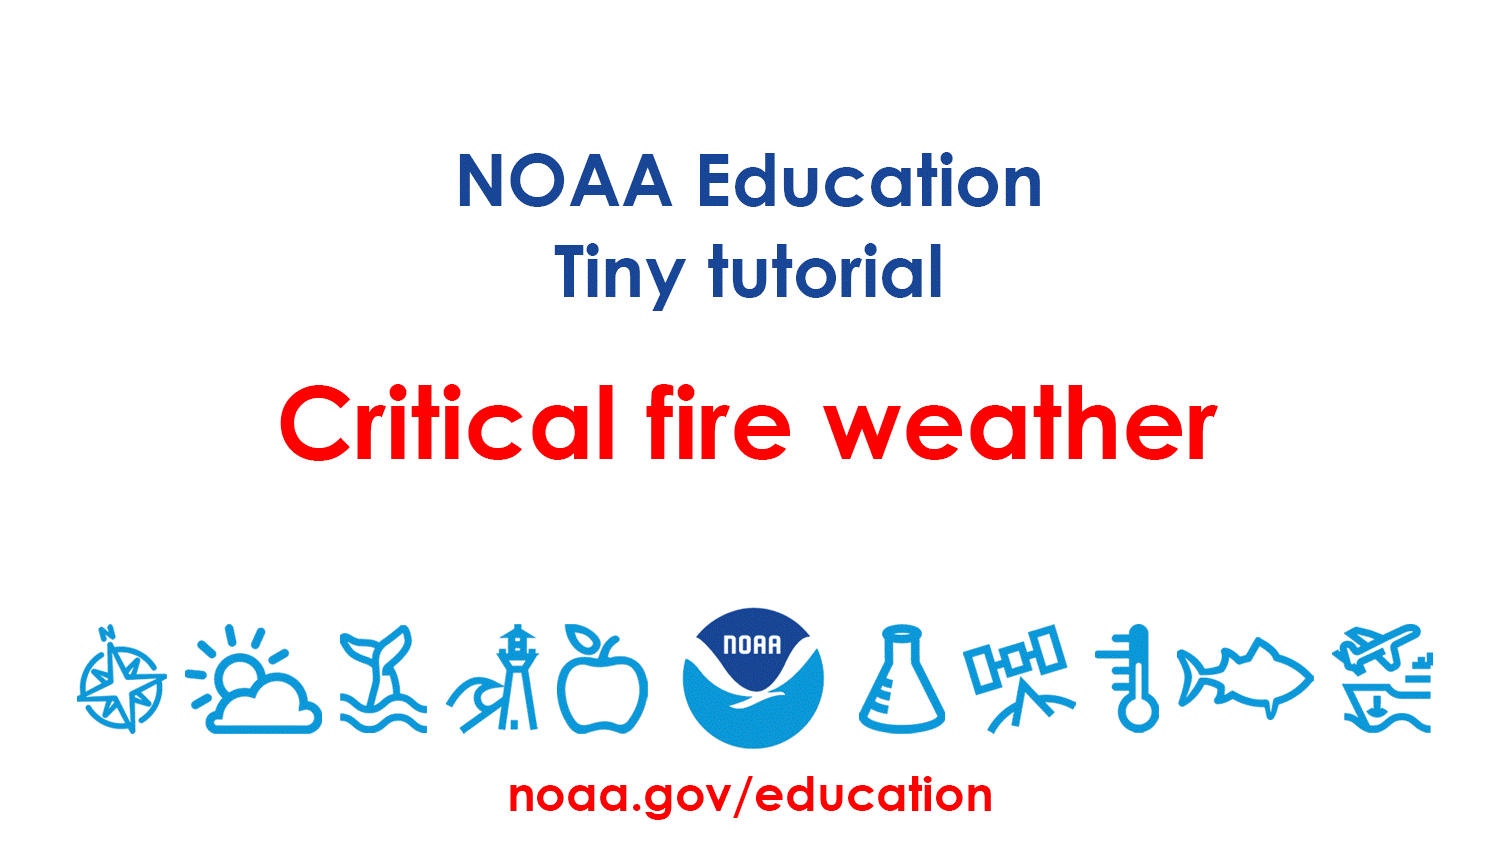 Animated tiny tutorial for accessing the critical fire weather forecast across the continental United States.